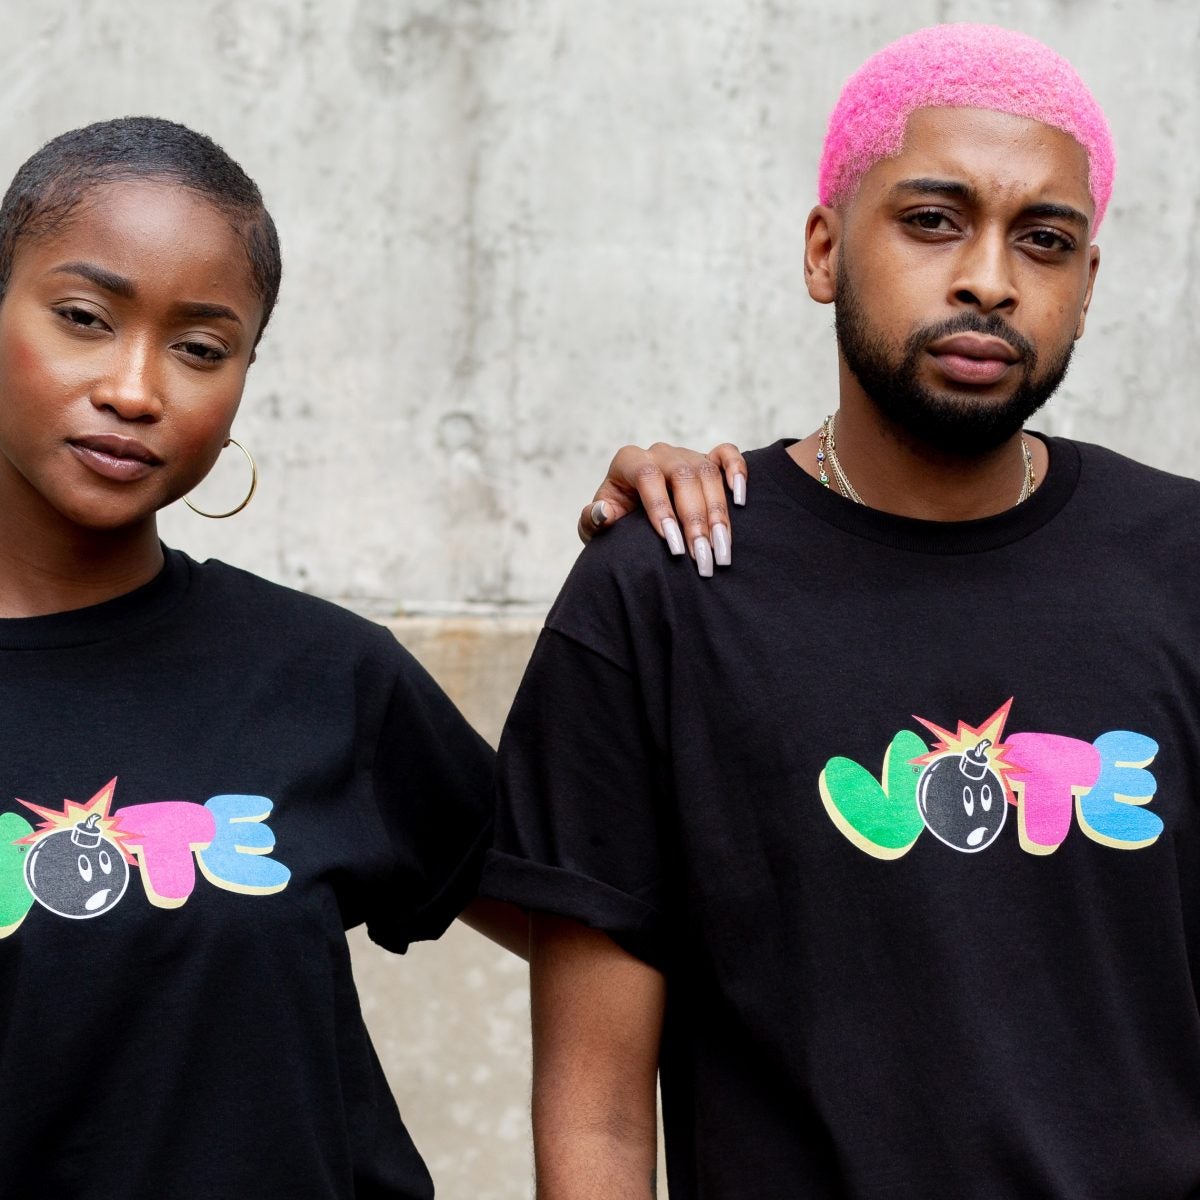 Michelle Obama’s Stylist Meredith Koop And Sarween Salih Co-Curate Second When We All Vote Collection